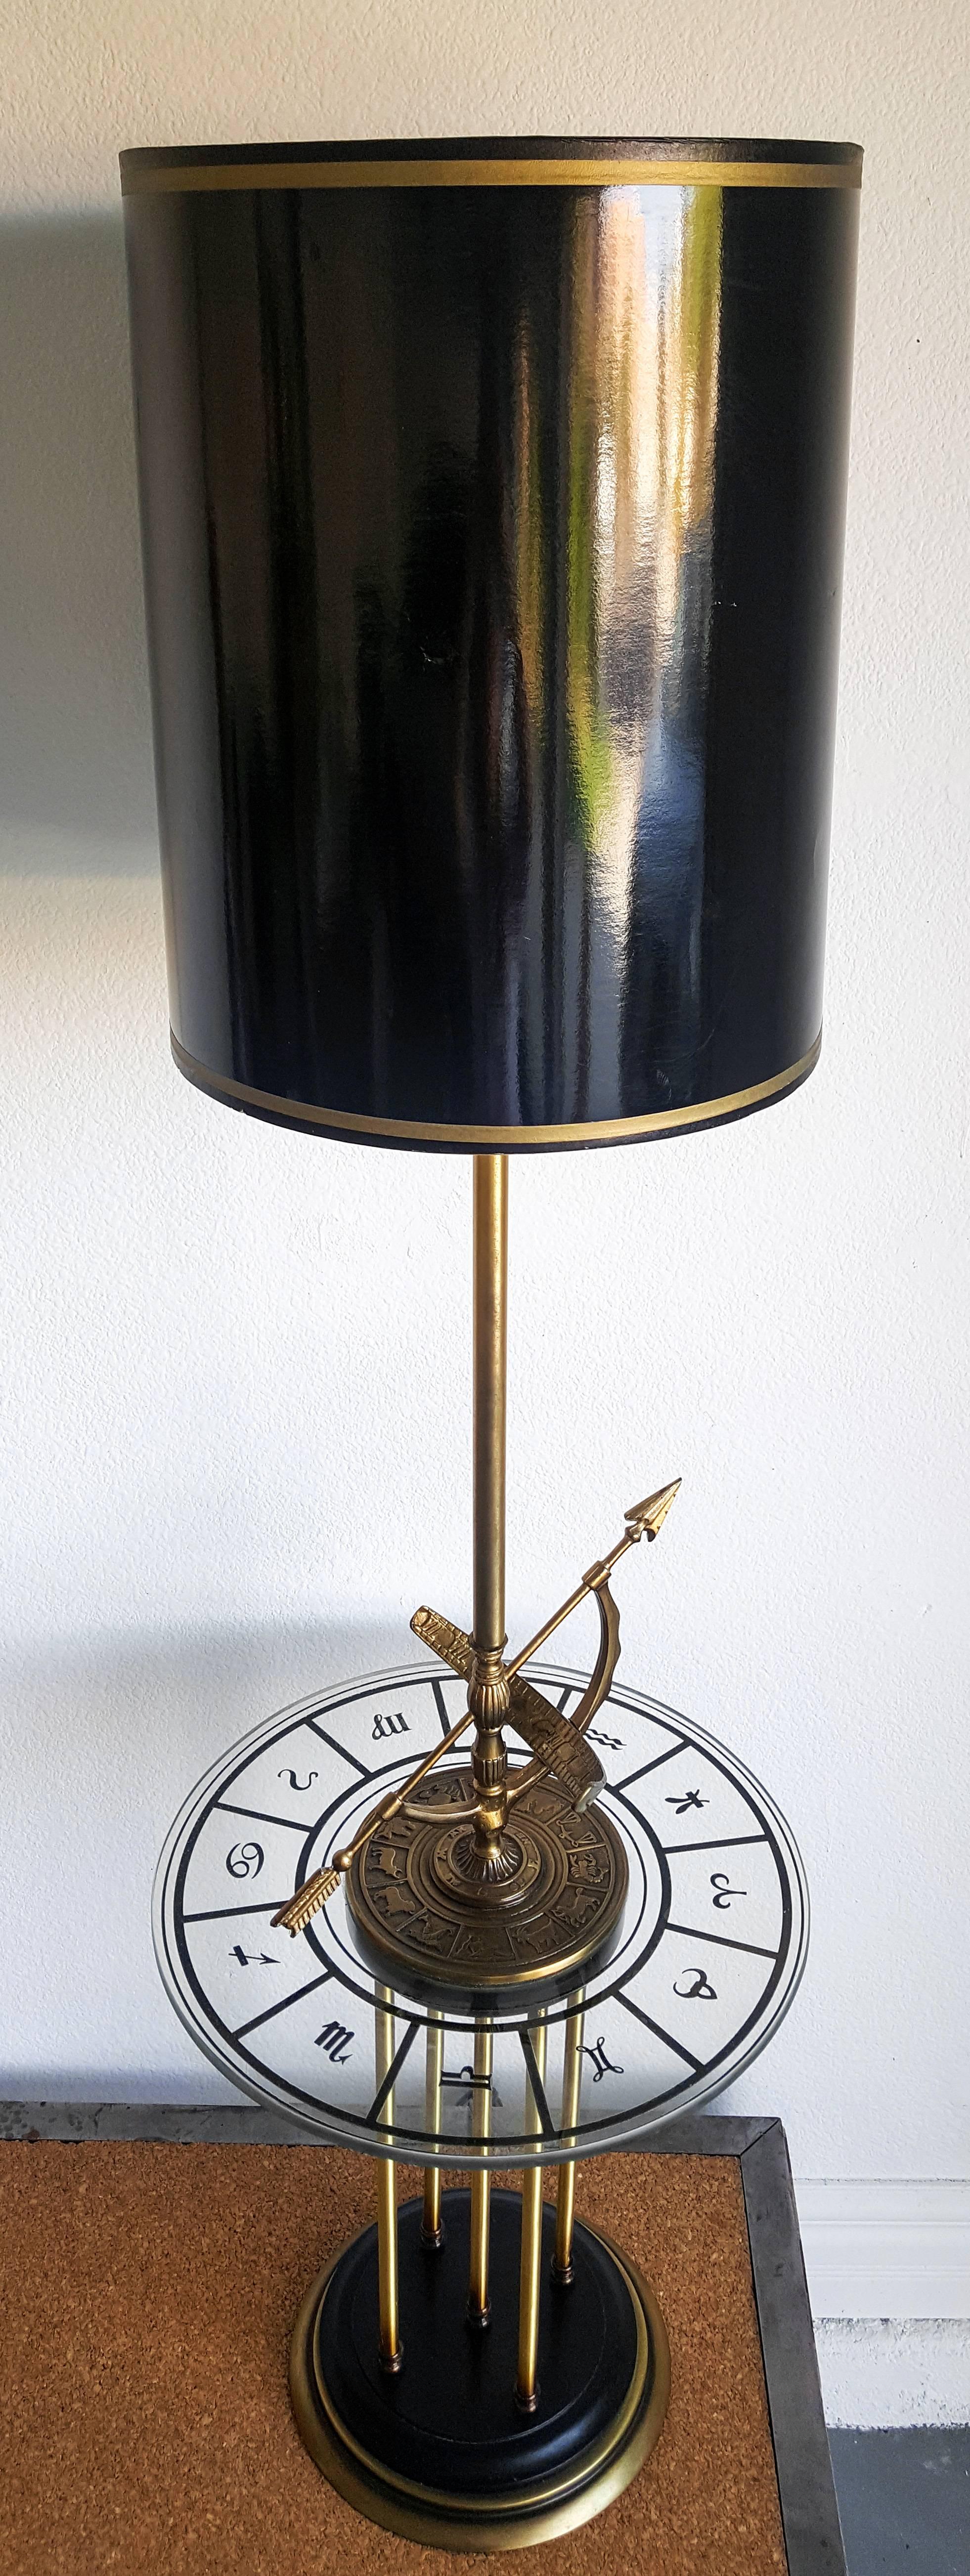 A stunning piece of Mid-Century design, this 1960s floor lamp features brass and bronze construction with a thick glass table mounted in the middle.

The glass table has each astrological sign in gold leaf. The brass plate that rests the middle of